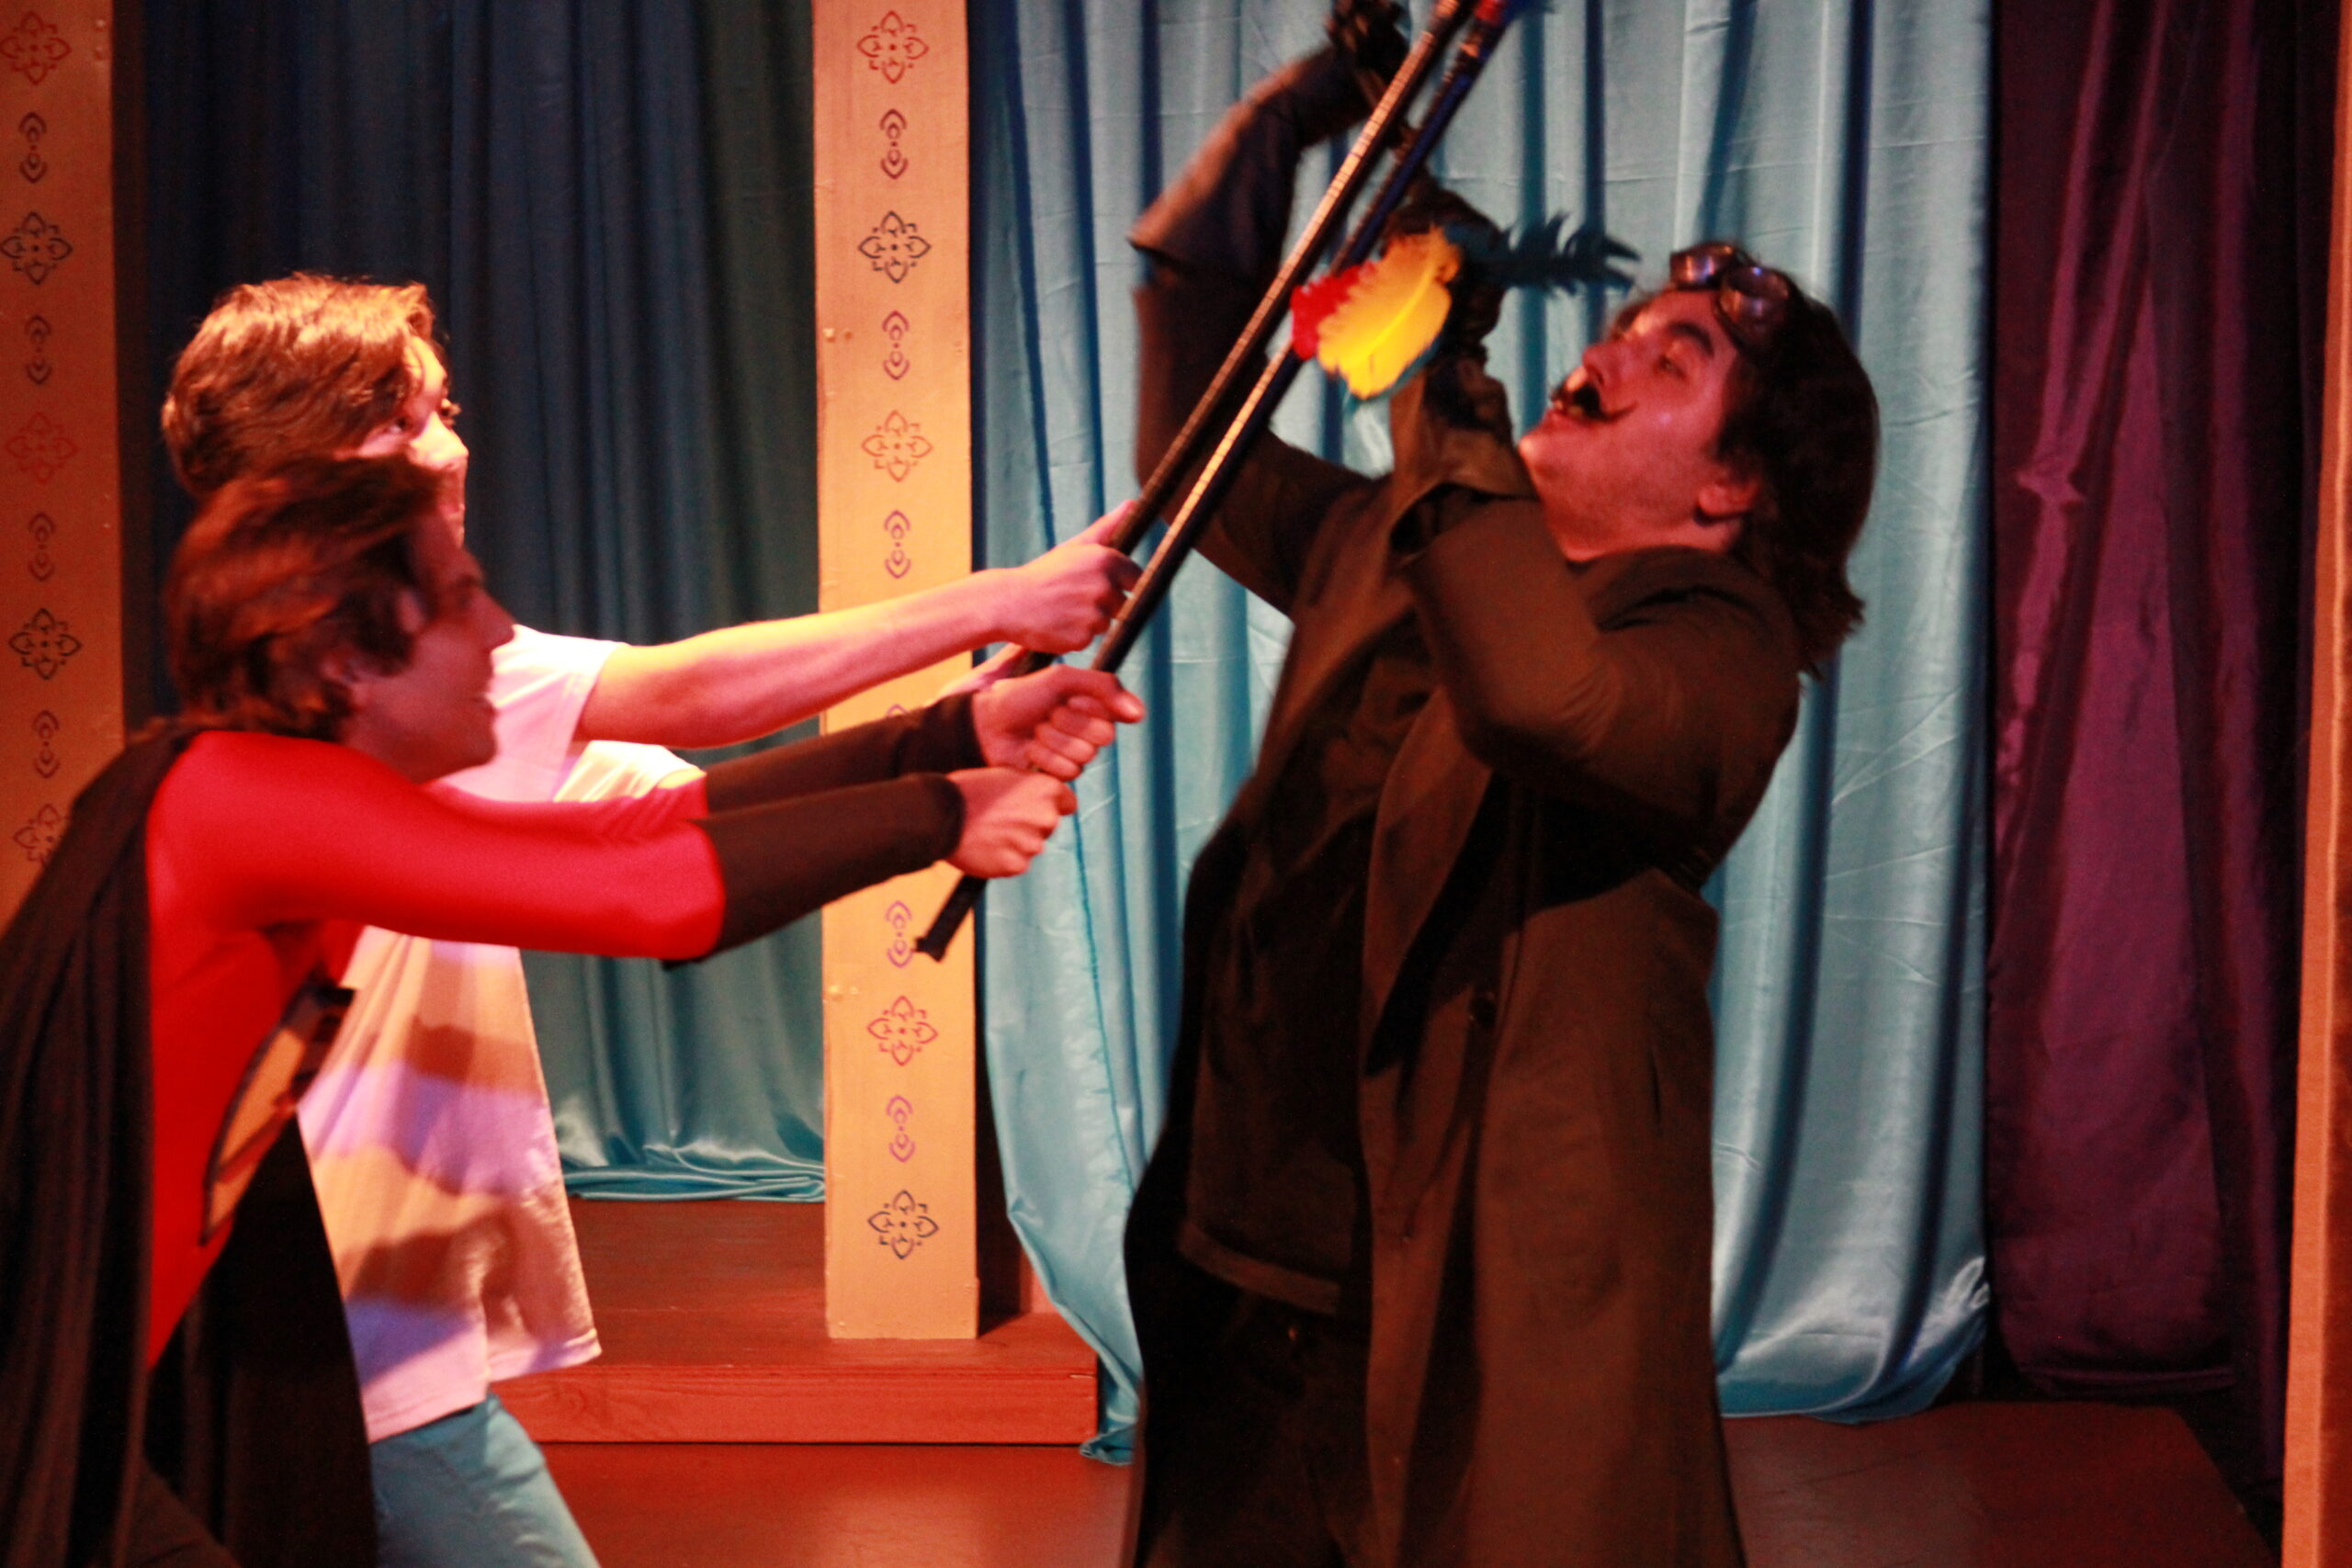 Inky (Scott Sharma) and Blackjack (Jase Lindgren) engage Sorcerer Slurm (Mark Lopez) in a Terrible Tickler duel in the World Premiere of Super Sidekick: The Musical, presented by Theatre Unleashed at The Sherry Theater in North Hollywood, CA